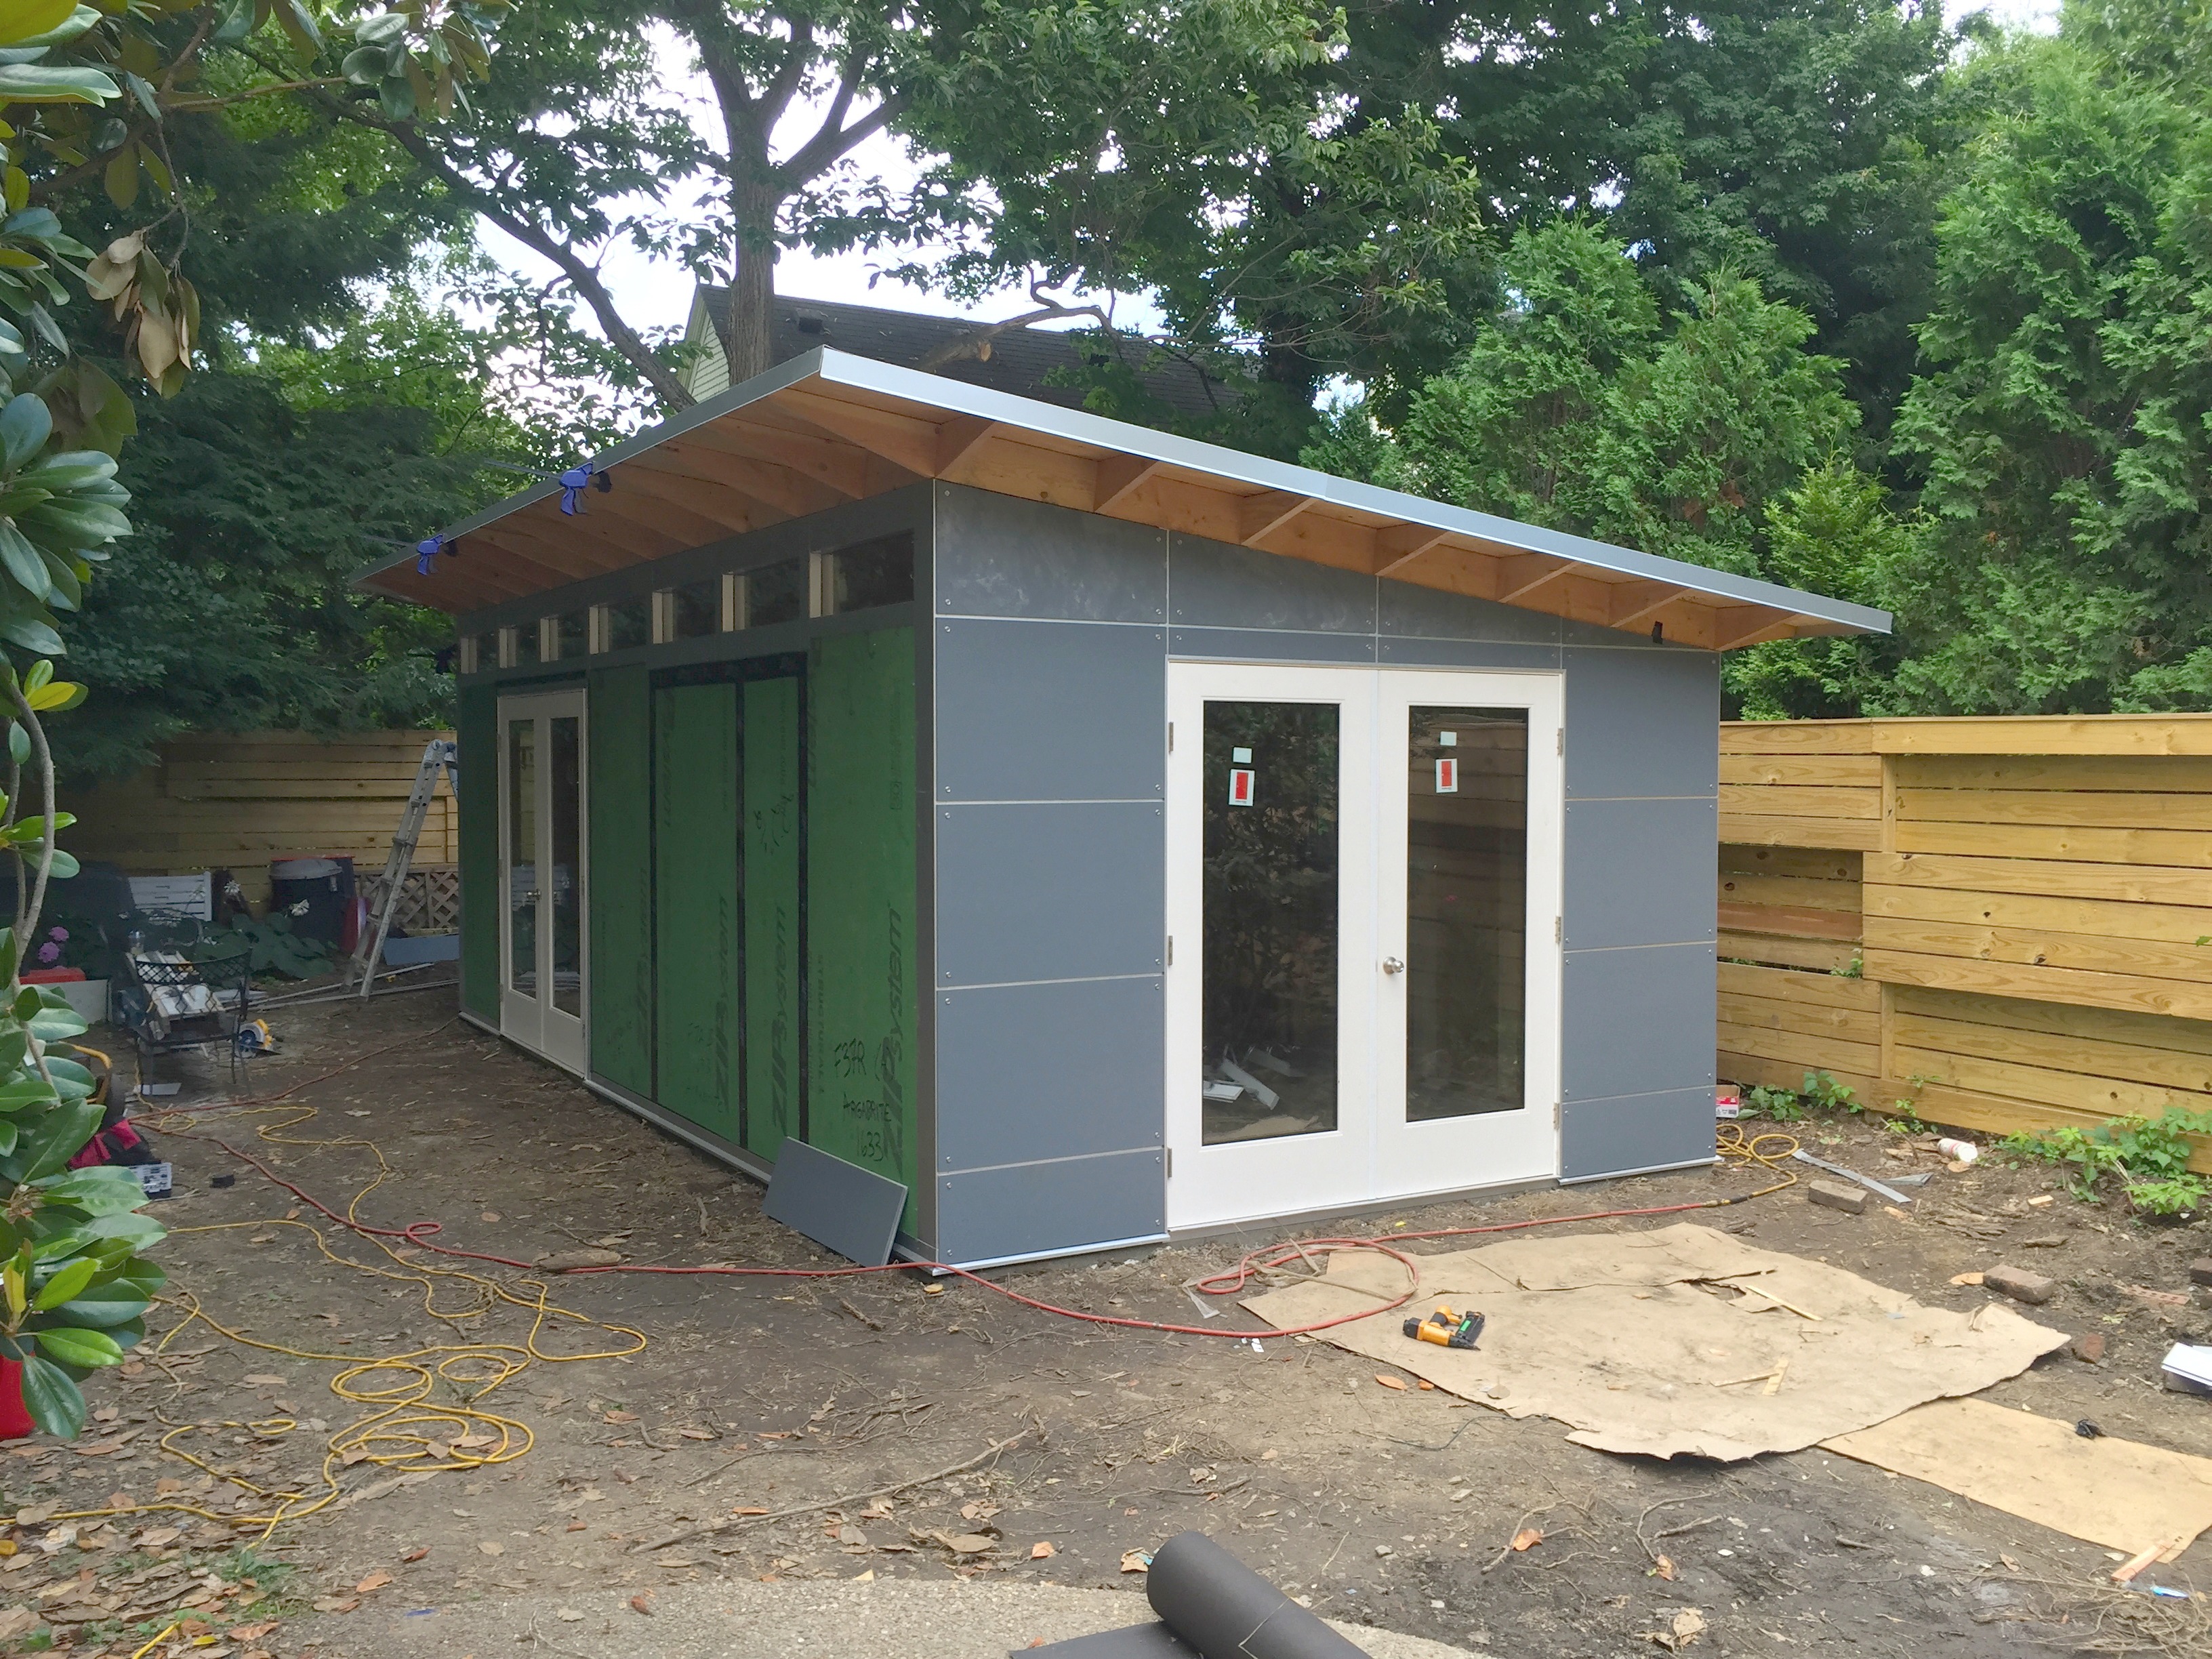 12'x24' Studio Shed - An Installer's View